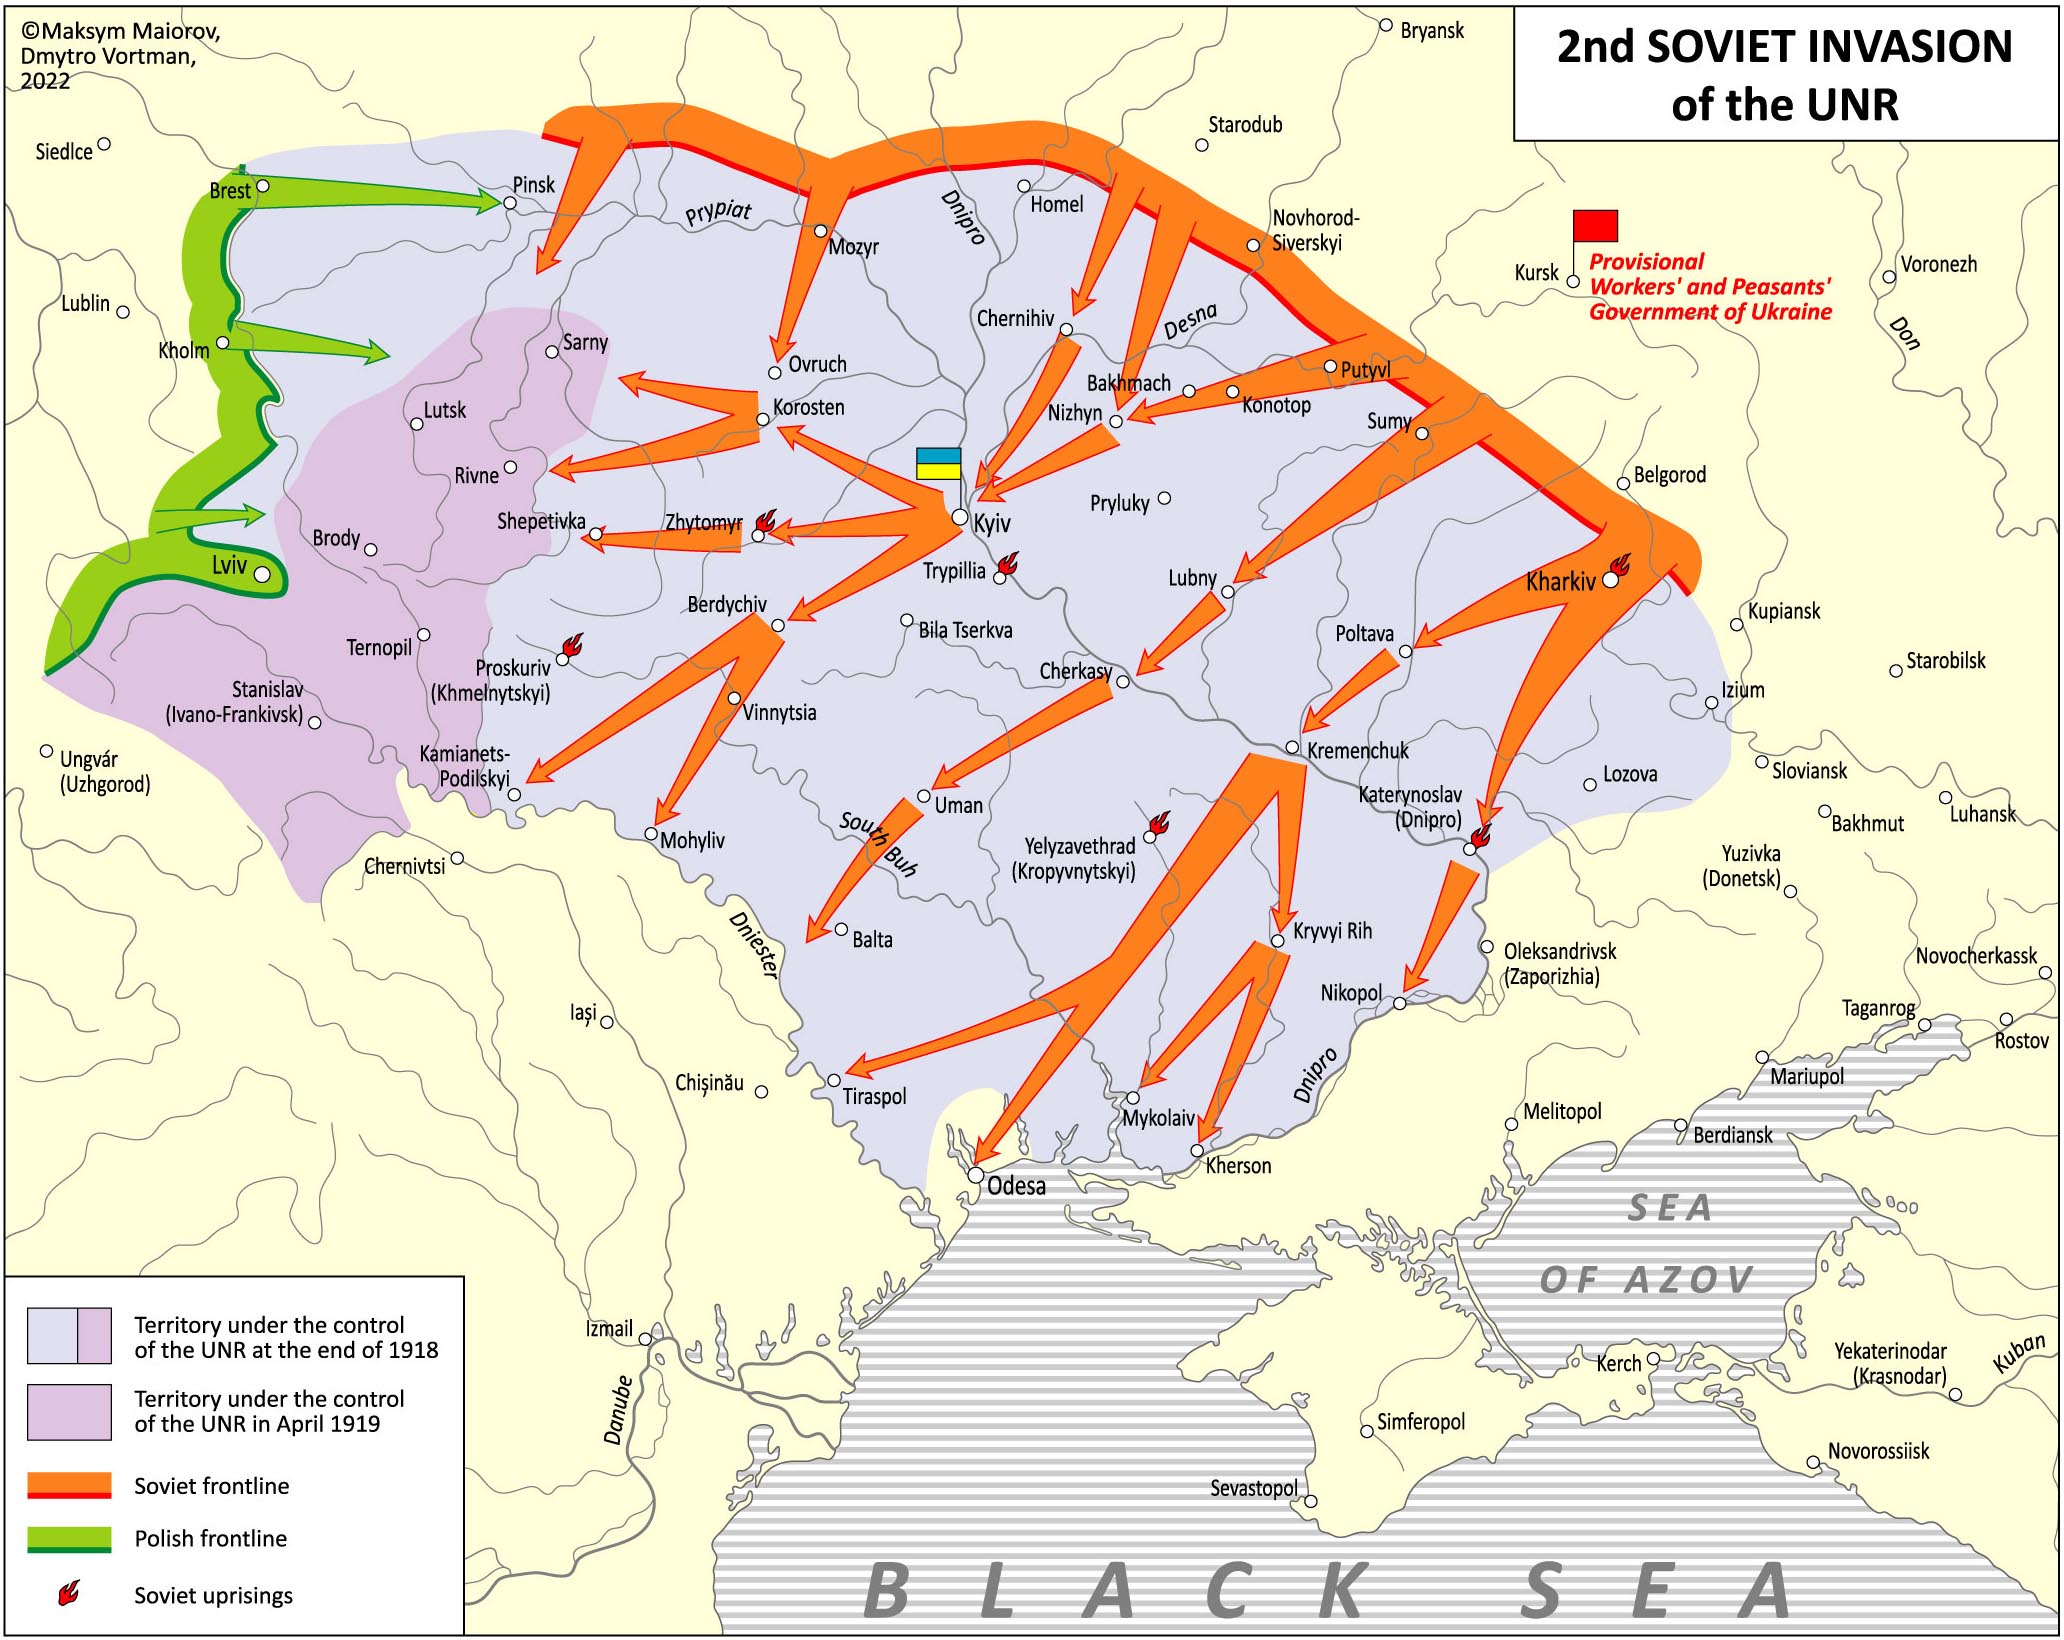 A map of the military operations during the second Soviet invasion of the UNR. Click to enlarge ~